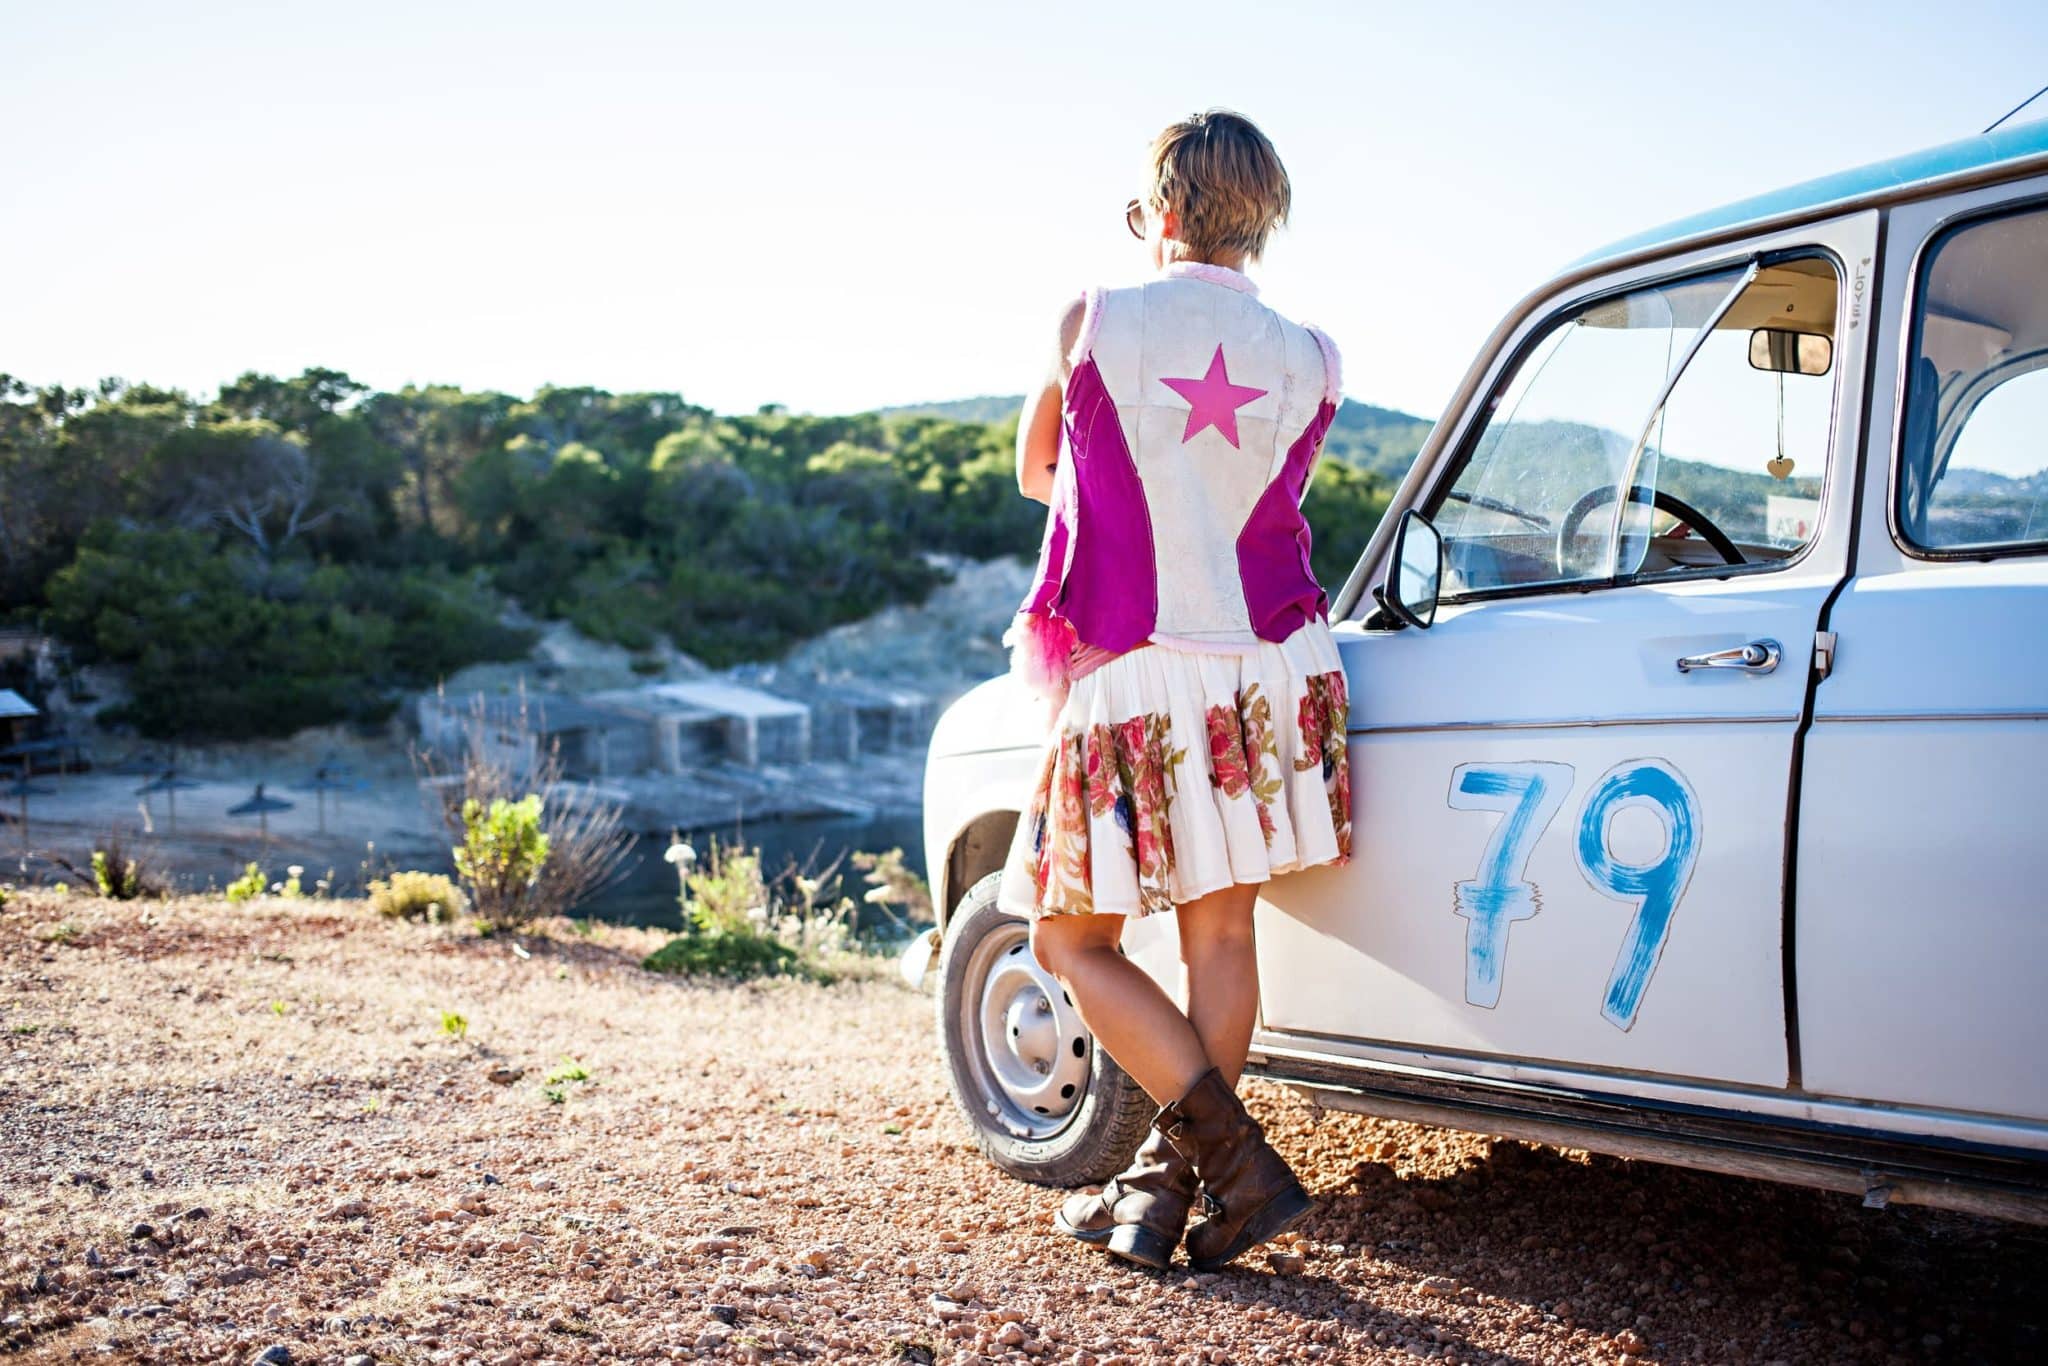 True Love on Ibiza - photographed by Holger Altgeld